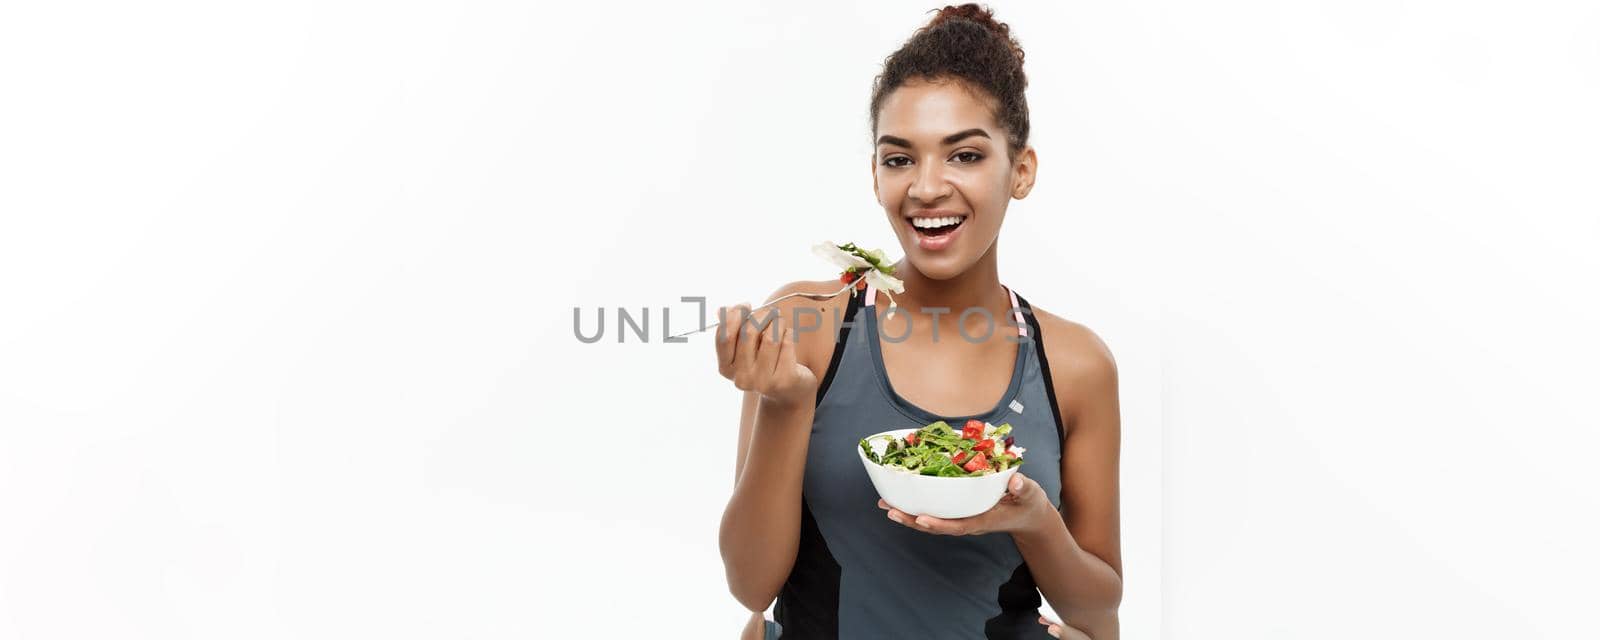 Healthy and Fitness concept - Beautiful American African lady in fitness clothes on diet eating fresh salad. Isolated on white background